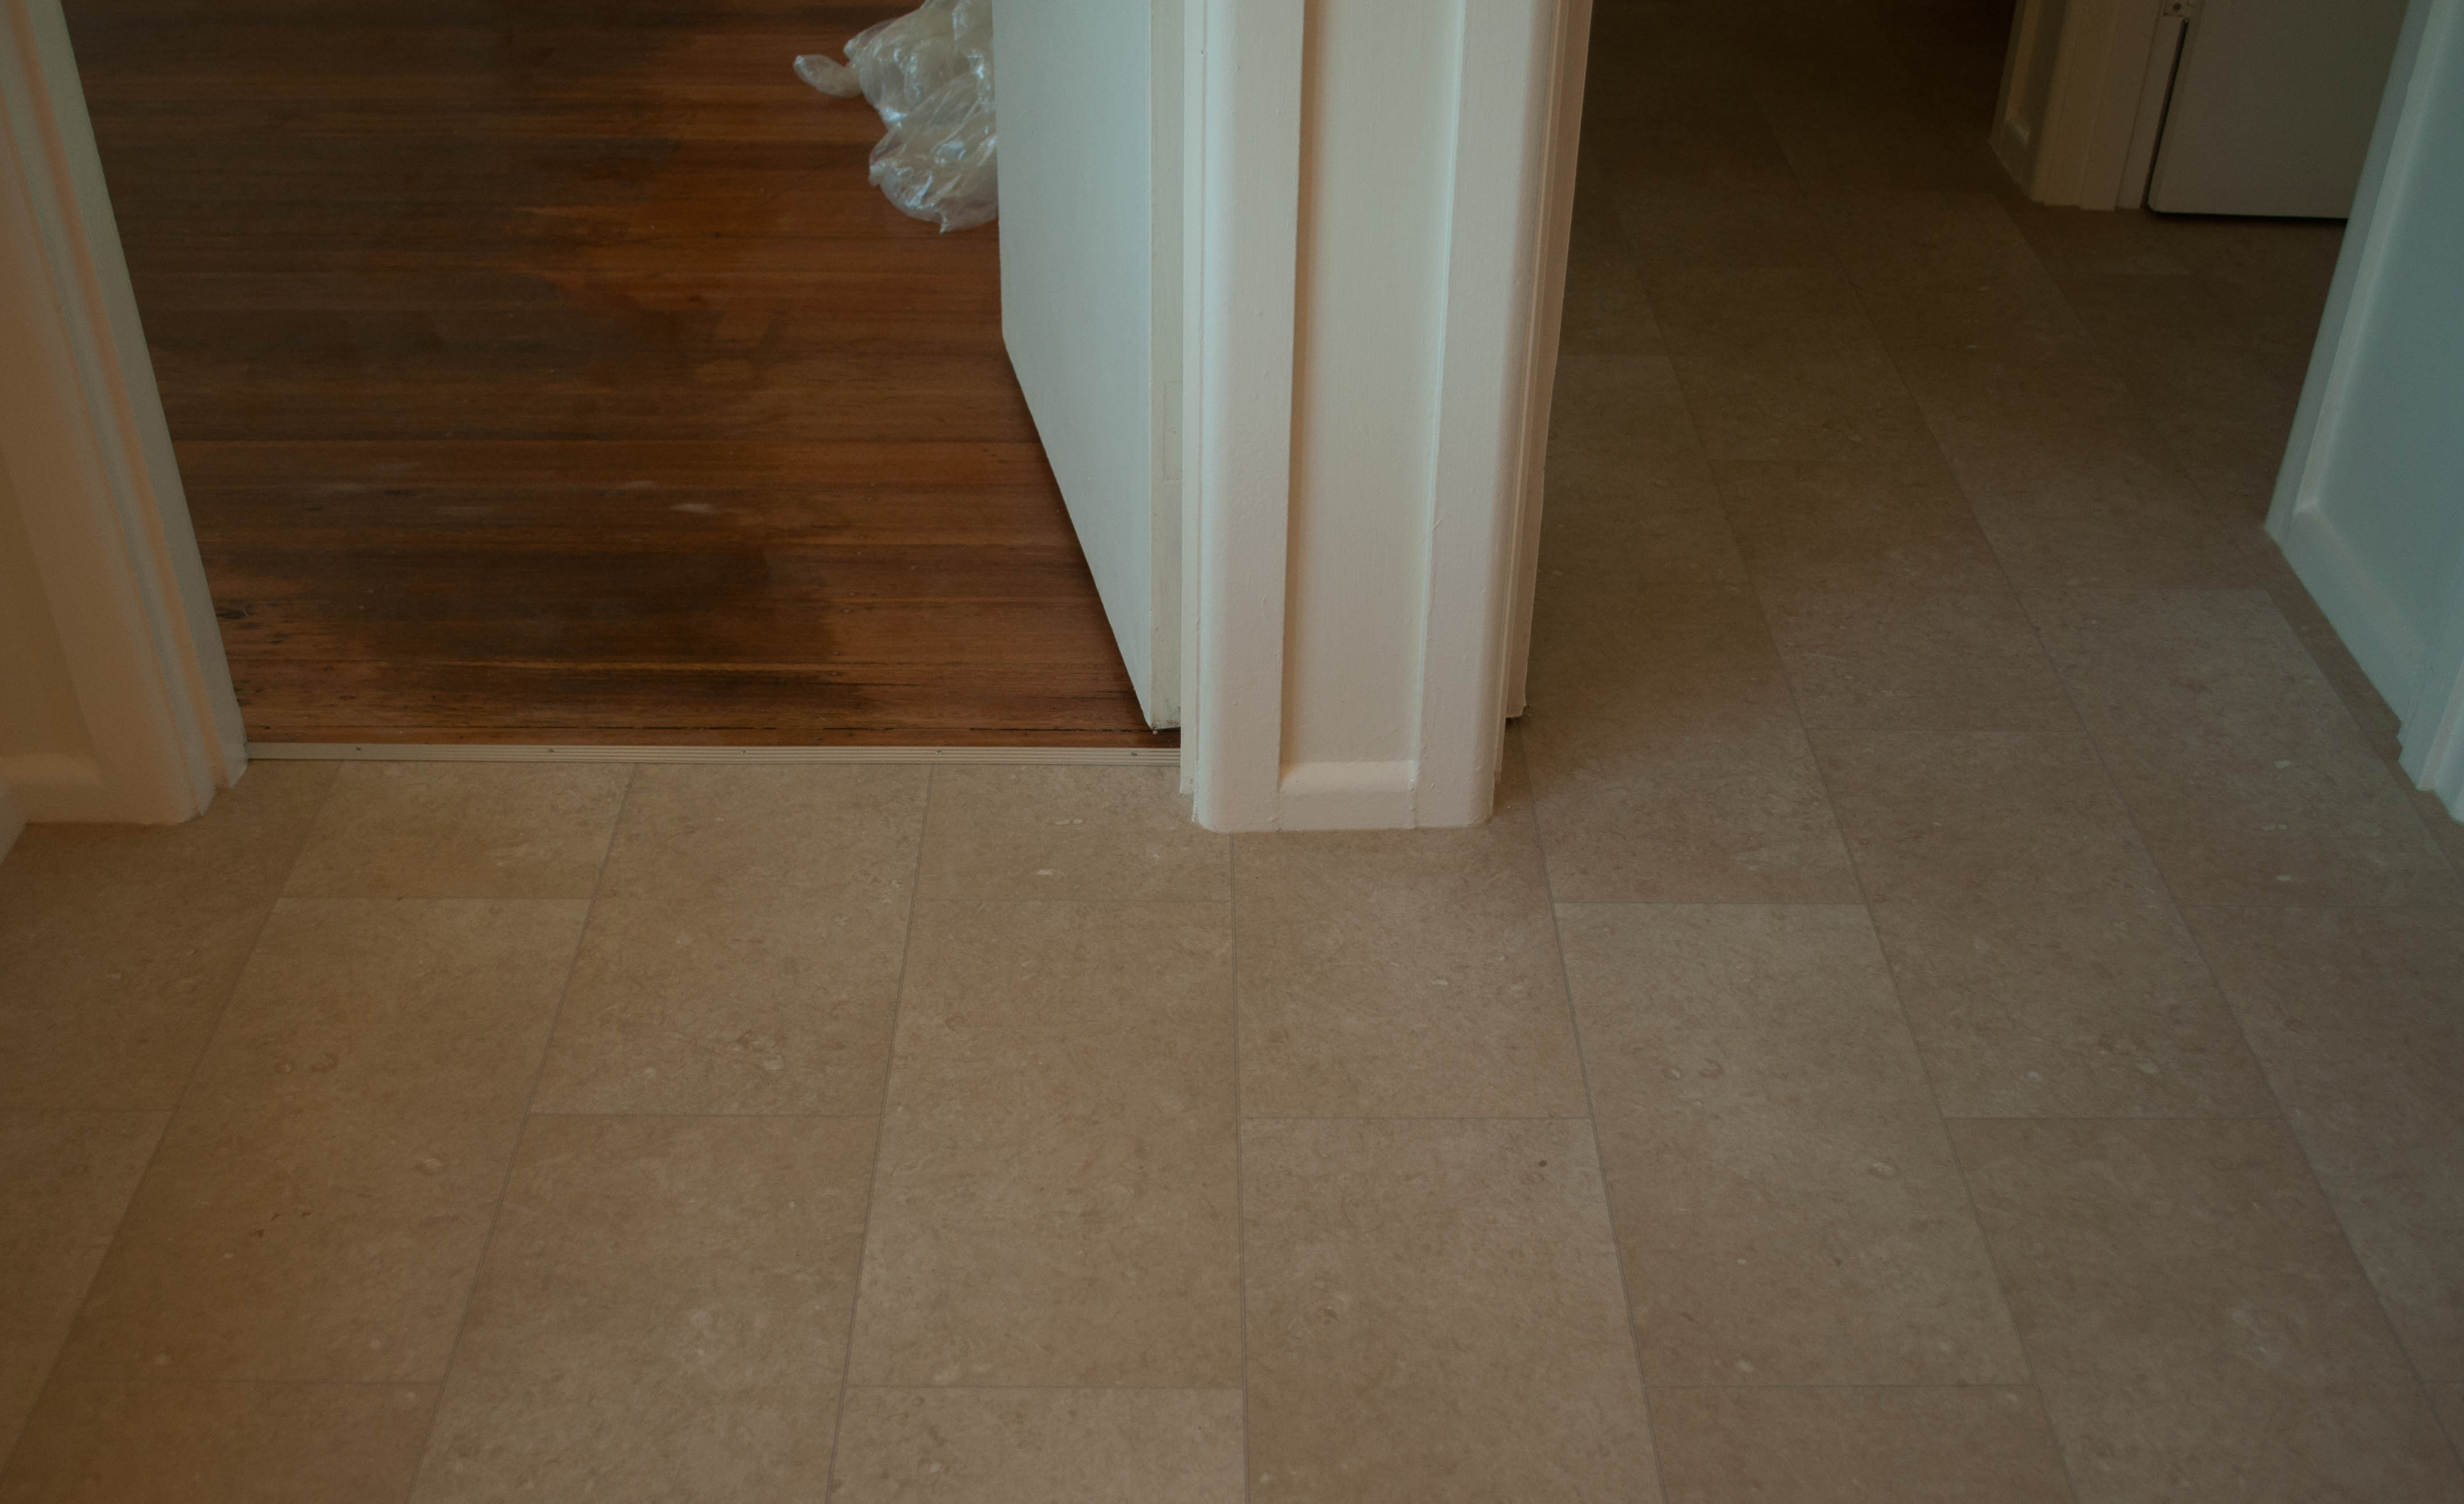 showing the floor in a dining room and adjoining passage that has a cream colored sheet vinyl installed on top of it.